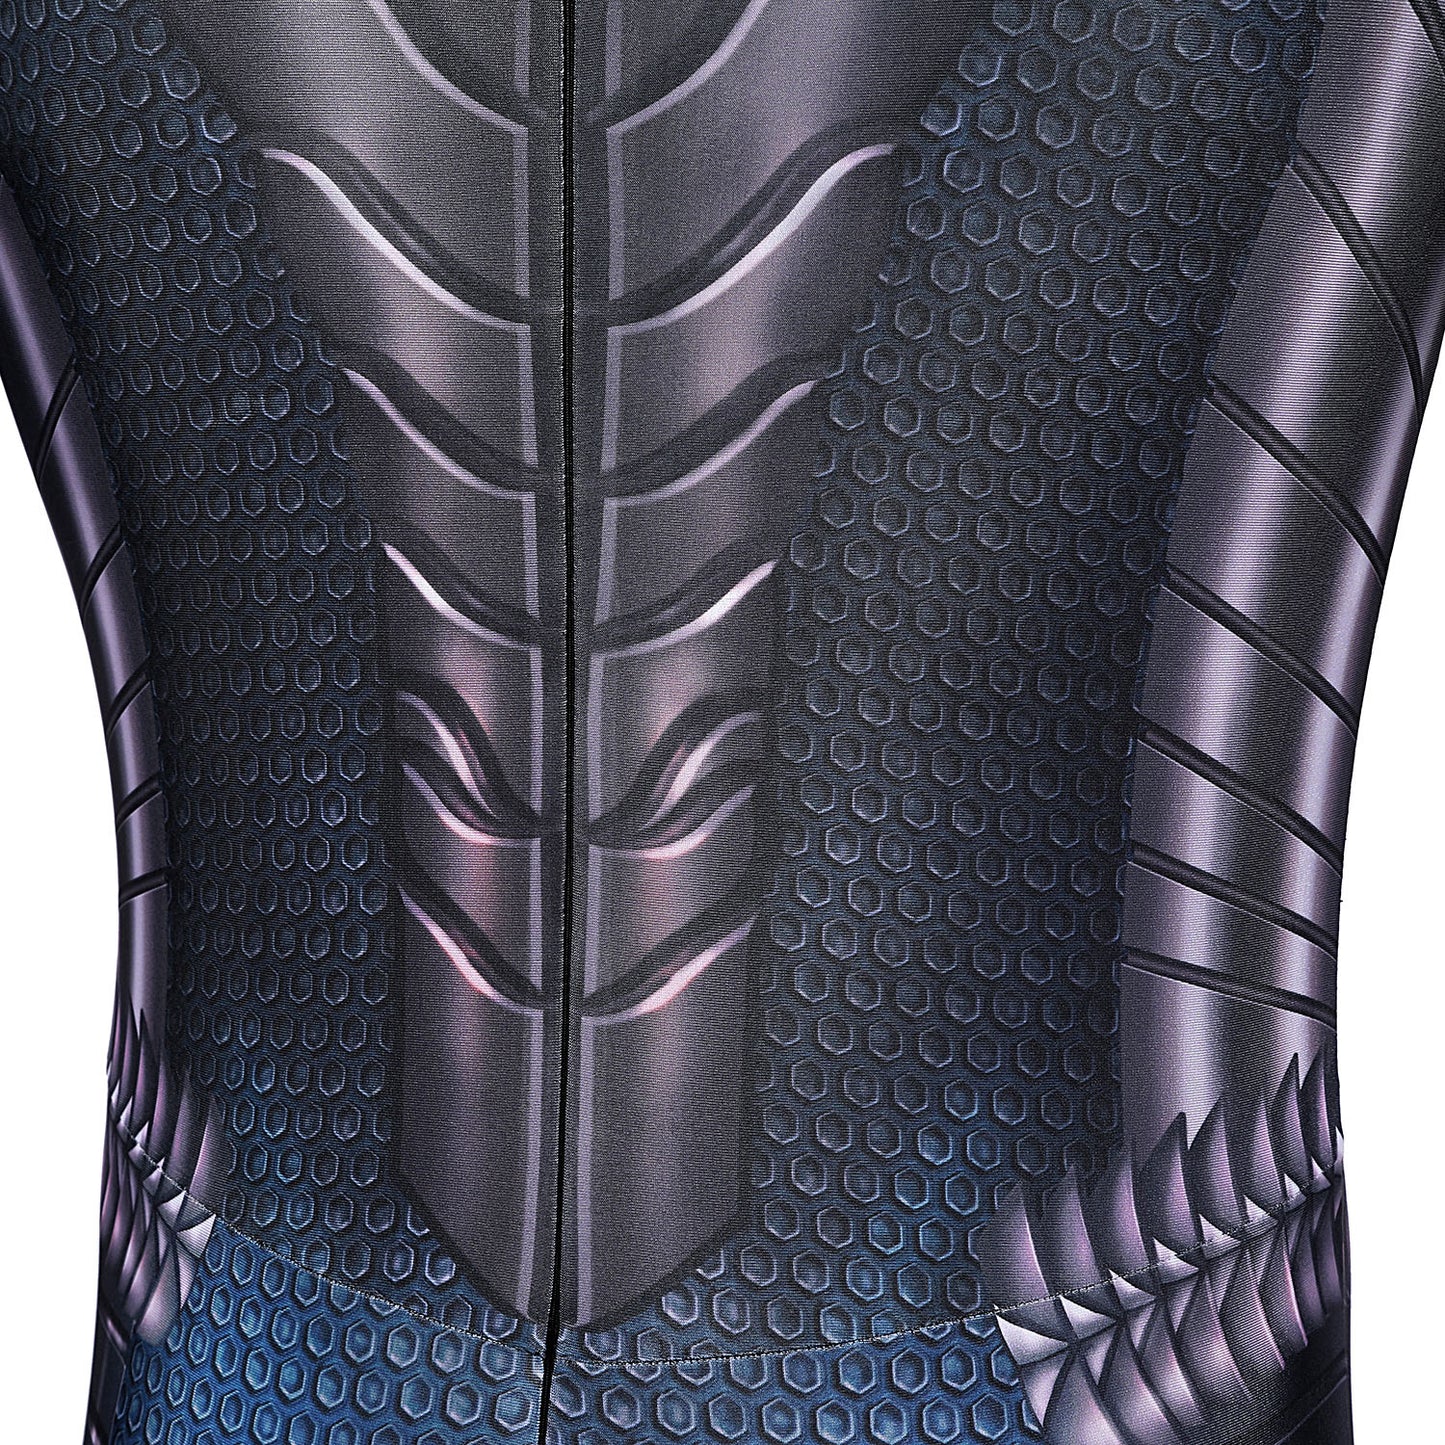 Justice League Aquaman 2 Arthur Curry Male Jumpsuit Cosplay Costumes